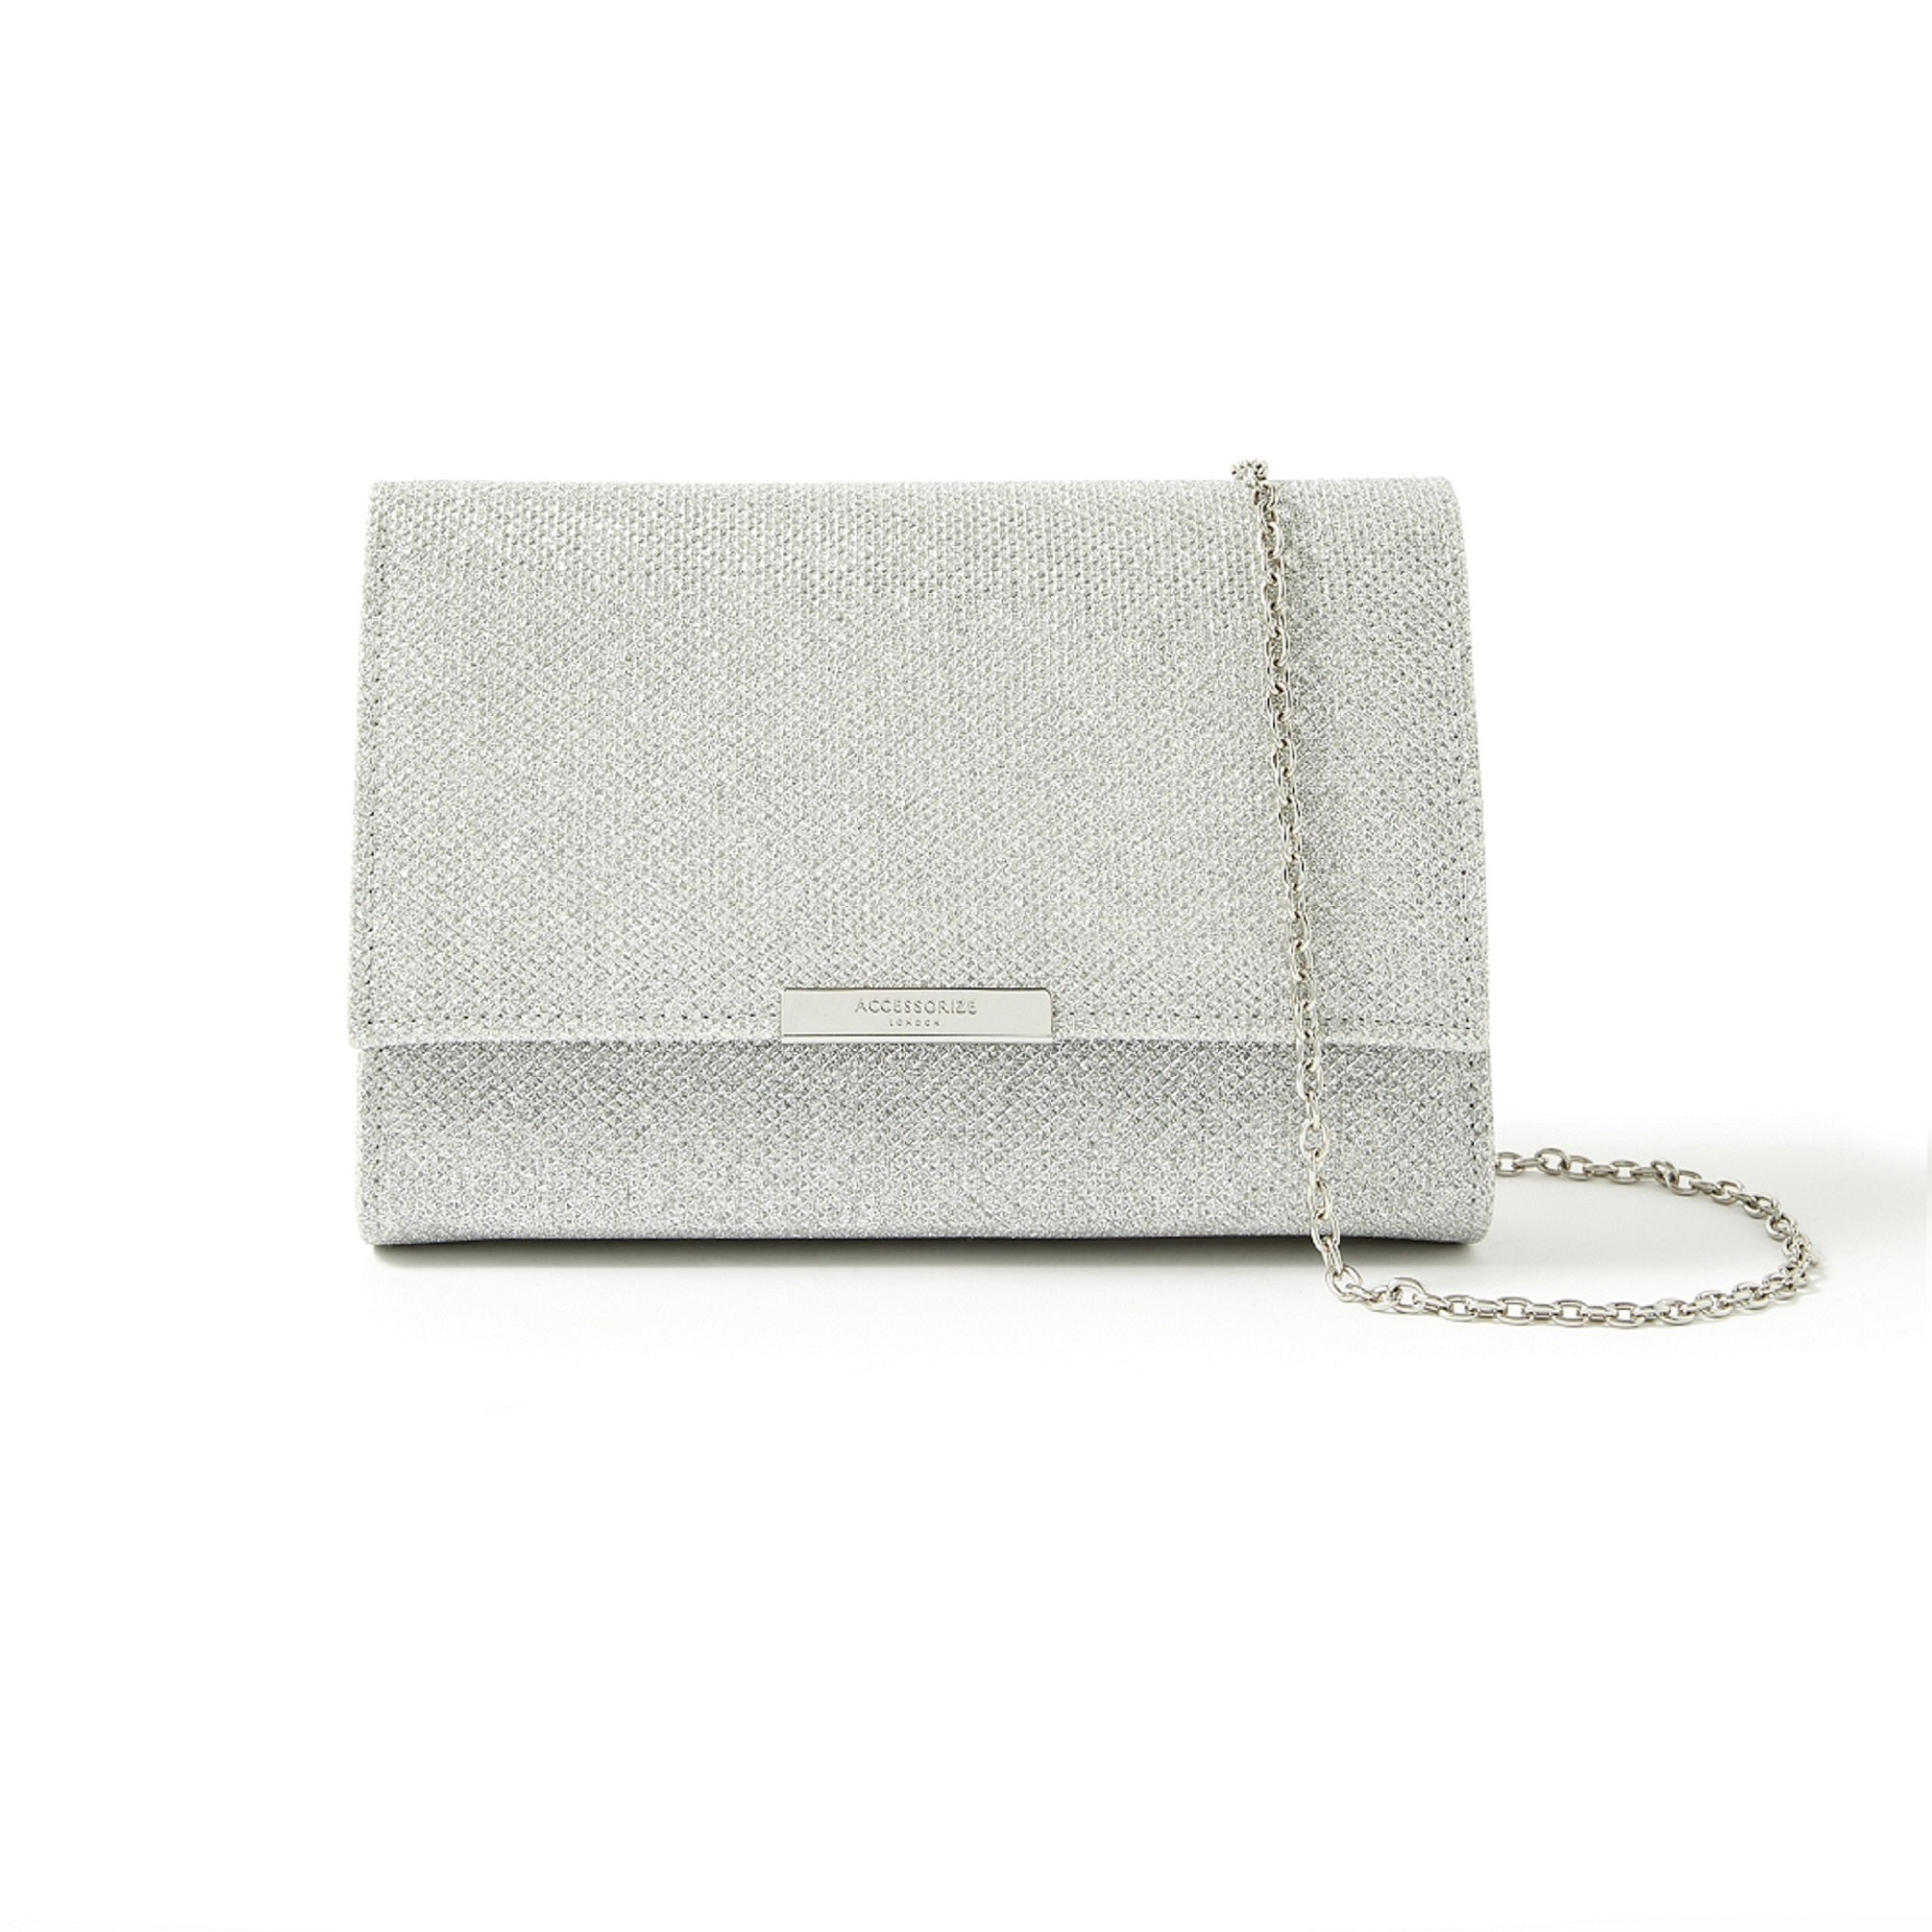 Bridal Clutch Bags: 11 Iconic Styles | OneFabDay.com